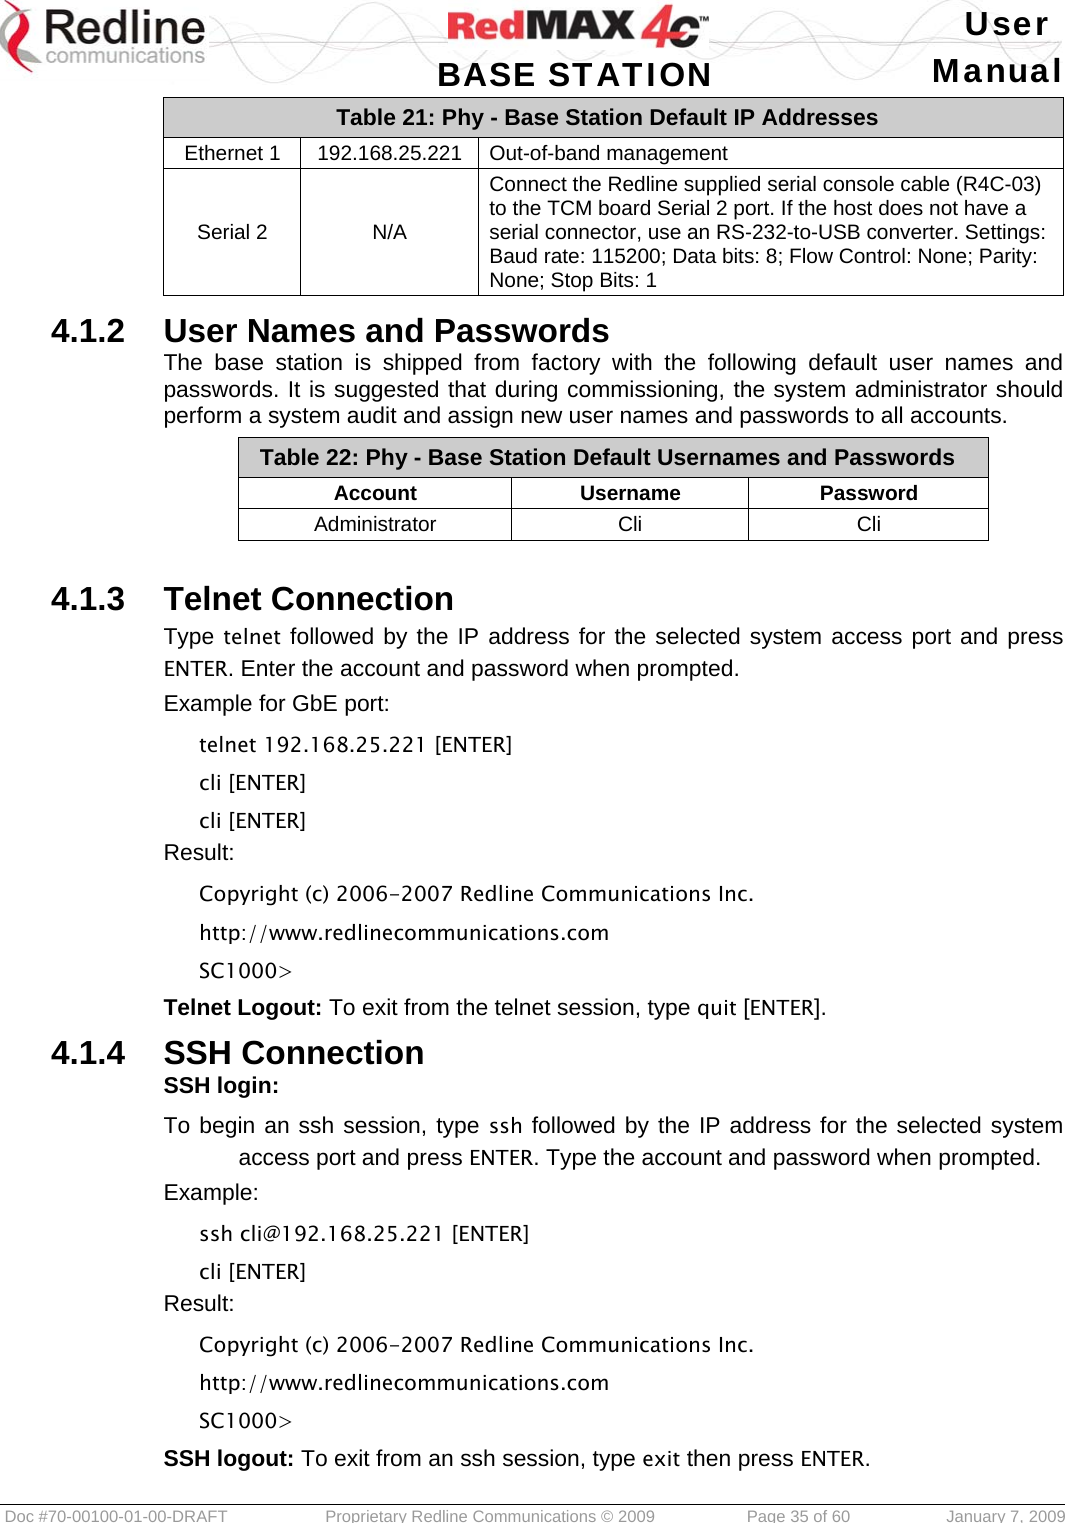   User  BASE STATION Manual  Doc #70-00100-01-00-DRAFT  Proprietary Redline Communications © 2009   Page 35 of 60  January 7, 2009 Table 21: Phy - Base Station Default IP Addresses Ethernet 1  192.168.25.221  Out-of-band management Serial 2  N/A Connect the Redline supplied serial console cable (R4C-03) to the TCM board Serial 2 port. If the host does not have a serial connector, use an RS-232-to-USB converter. Settings: Baud rate: 115200; Data bits: 8; Flow Control: None; Parity: None; Stop Bits: 1  4.1.2  User Names and Passwords The base station is shipped from factory with the following default user names and passwords. It is suggested that during commissioning, the system administrator should perform a system audit and assign new user names and passwords to all accounts. Table 22: Phy - Base Station Default Usernames and Passwords Account Username Password Administrator Cli  Cli  4.1.3  Telnet Connection Type telnet followed by the IP address for the selected system access port and press ENTER. Enter the account and password when prompted. Example for GbE port: telnet 192.168.25.221 [ENTER] cli [ENTER]  cli [ENTER] Result: Copyright (c) 2006-2007 Redline Communications Inc. http://www.redlinecommunications.com SC1000&gt; Telnet Logout: To exit from the telnet session, type quit [ENTER].  4.1.4  SSH Connection SSH login: To begin an ssh session, type ssh followed by the IP address for the selected system access port and press ENTER. Type the account and password when prompted. Example: ssh cli@192.168.25.221 [ENTER] cli [ENTER] Result: Copyright (c) 2006-2007 Redline Communications Inc. http://www.redlinecommunications.com SC1000&gt; SSH logout: To exit from an ssh session, type exit then press ENTER.   